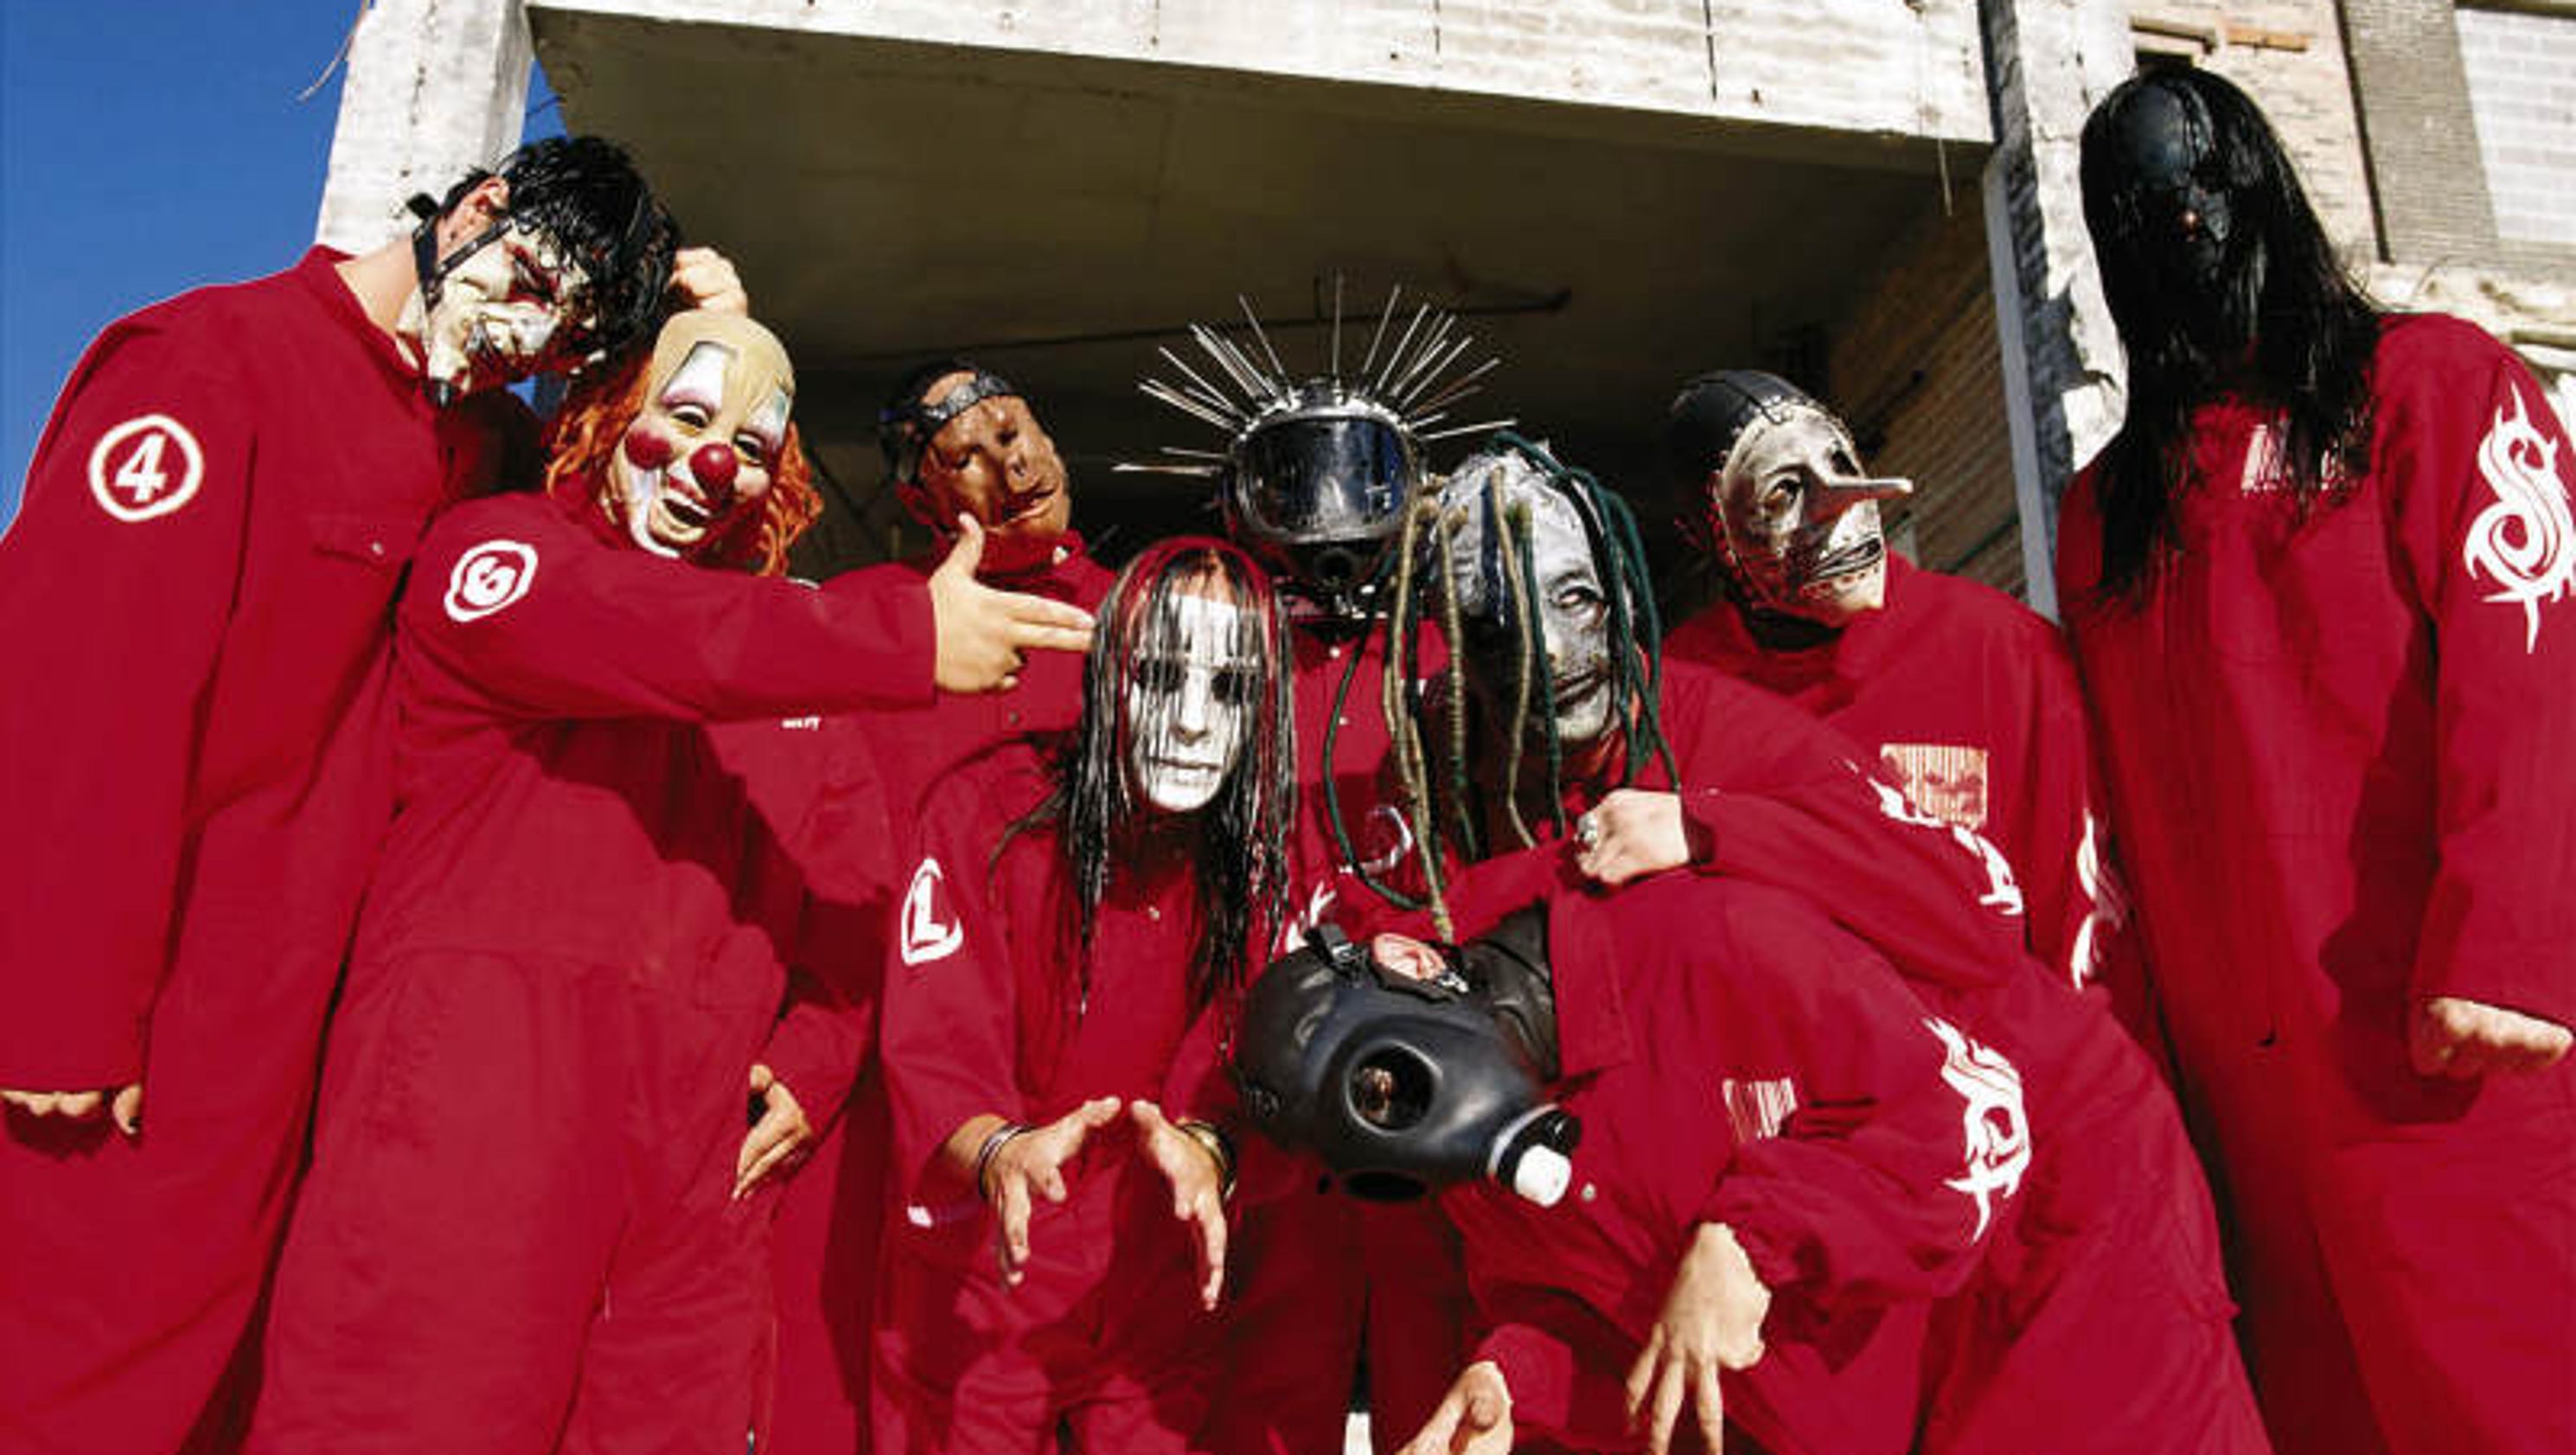 25 photos Slipknot throughout the years